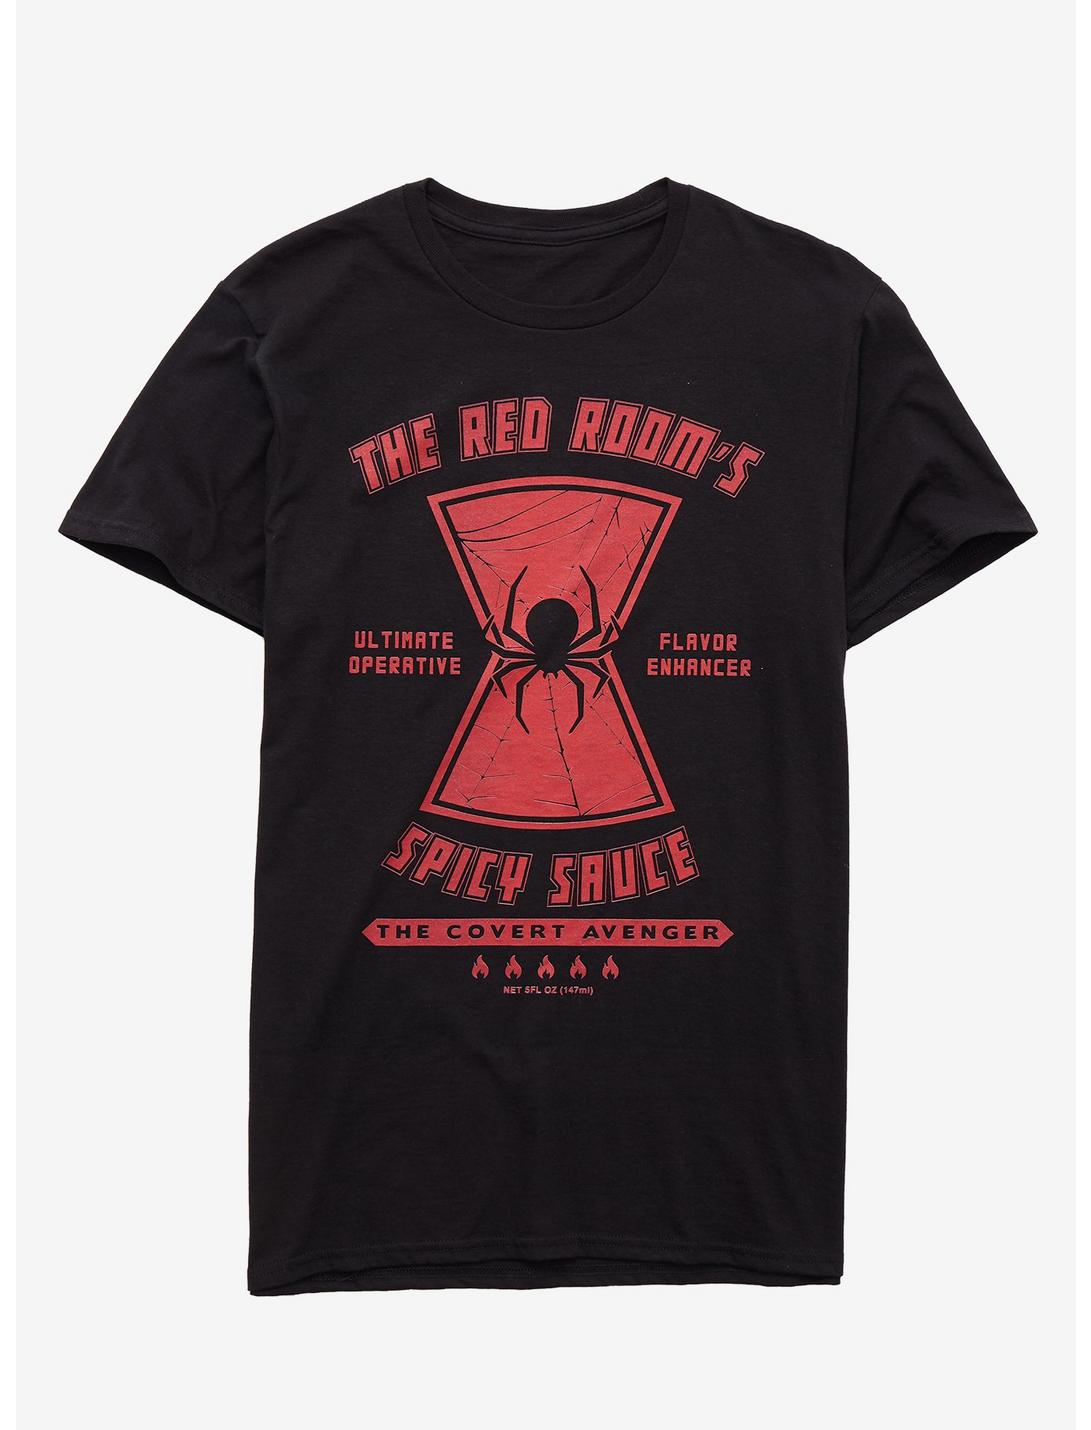 Marvel Black Widow Red Room's Spicy Sauce T-Shirt - BoxLunch Exclusive, BLACK, hi-res